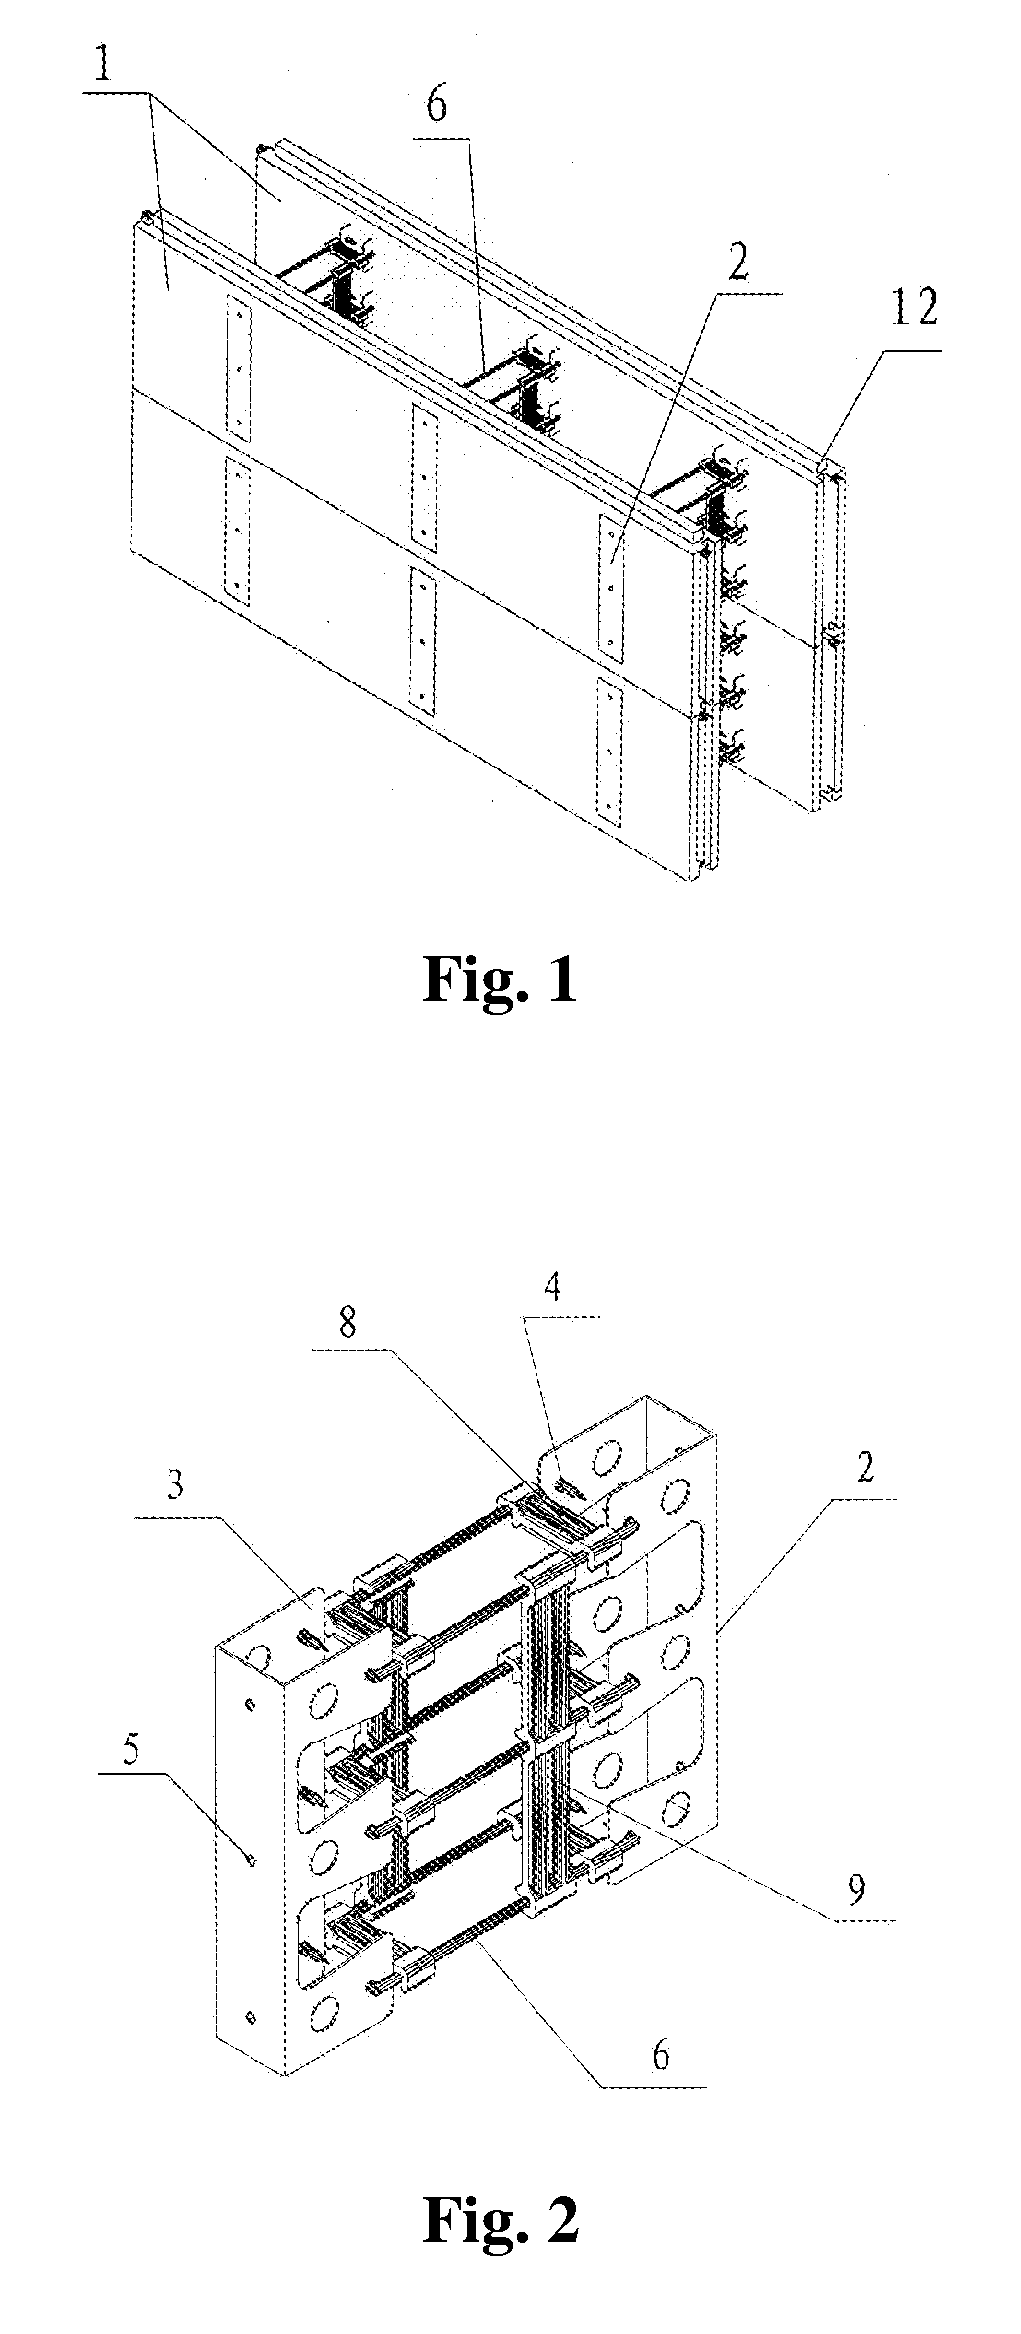 Assemblage concrete forms and method for manufacturing thereof